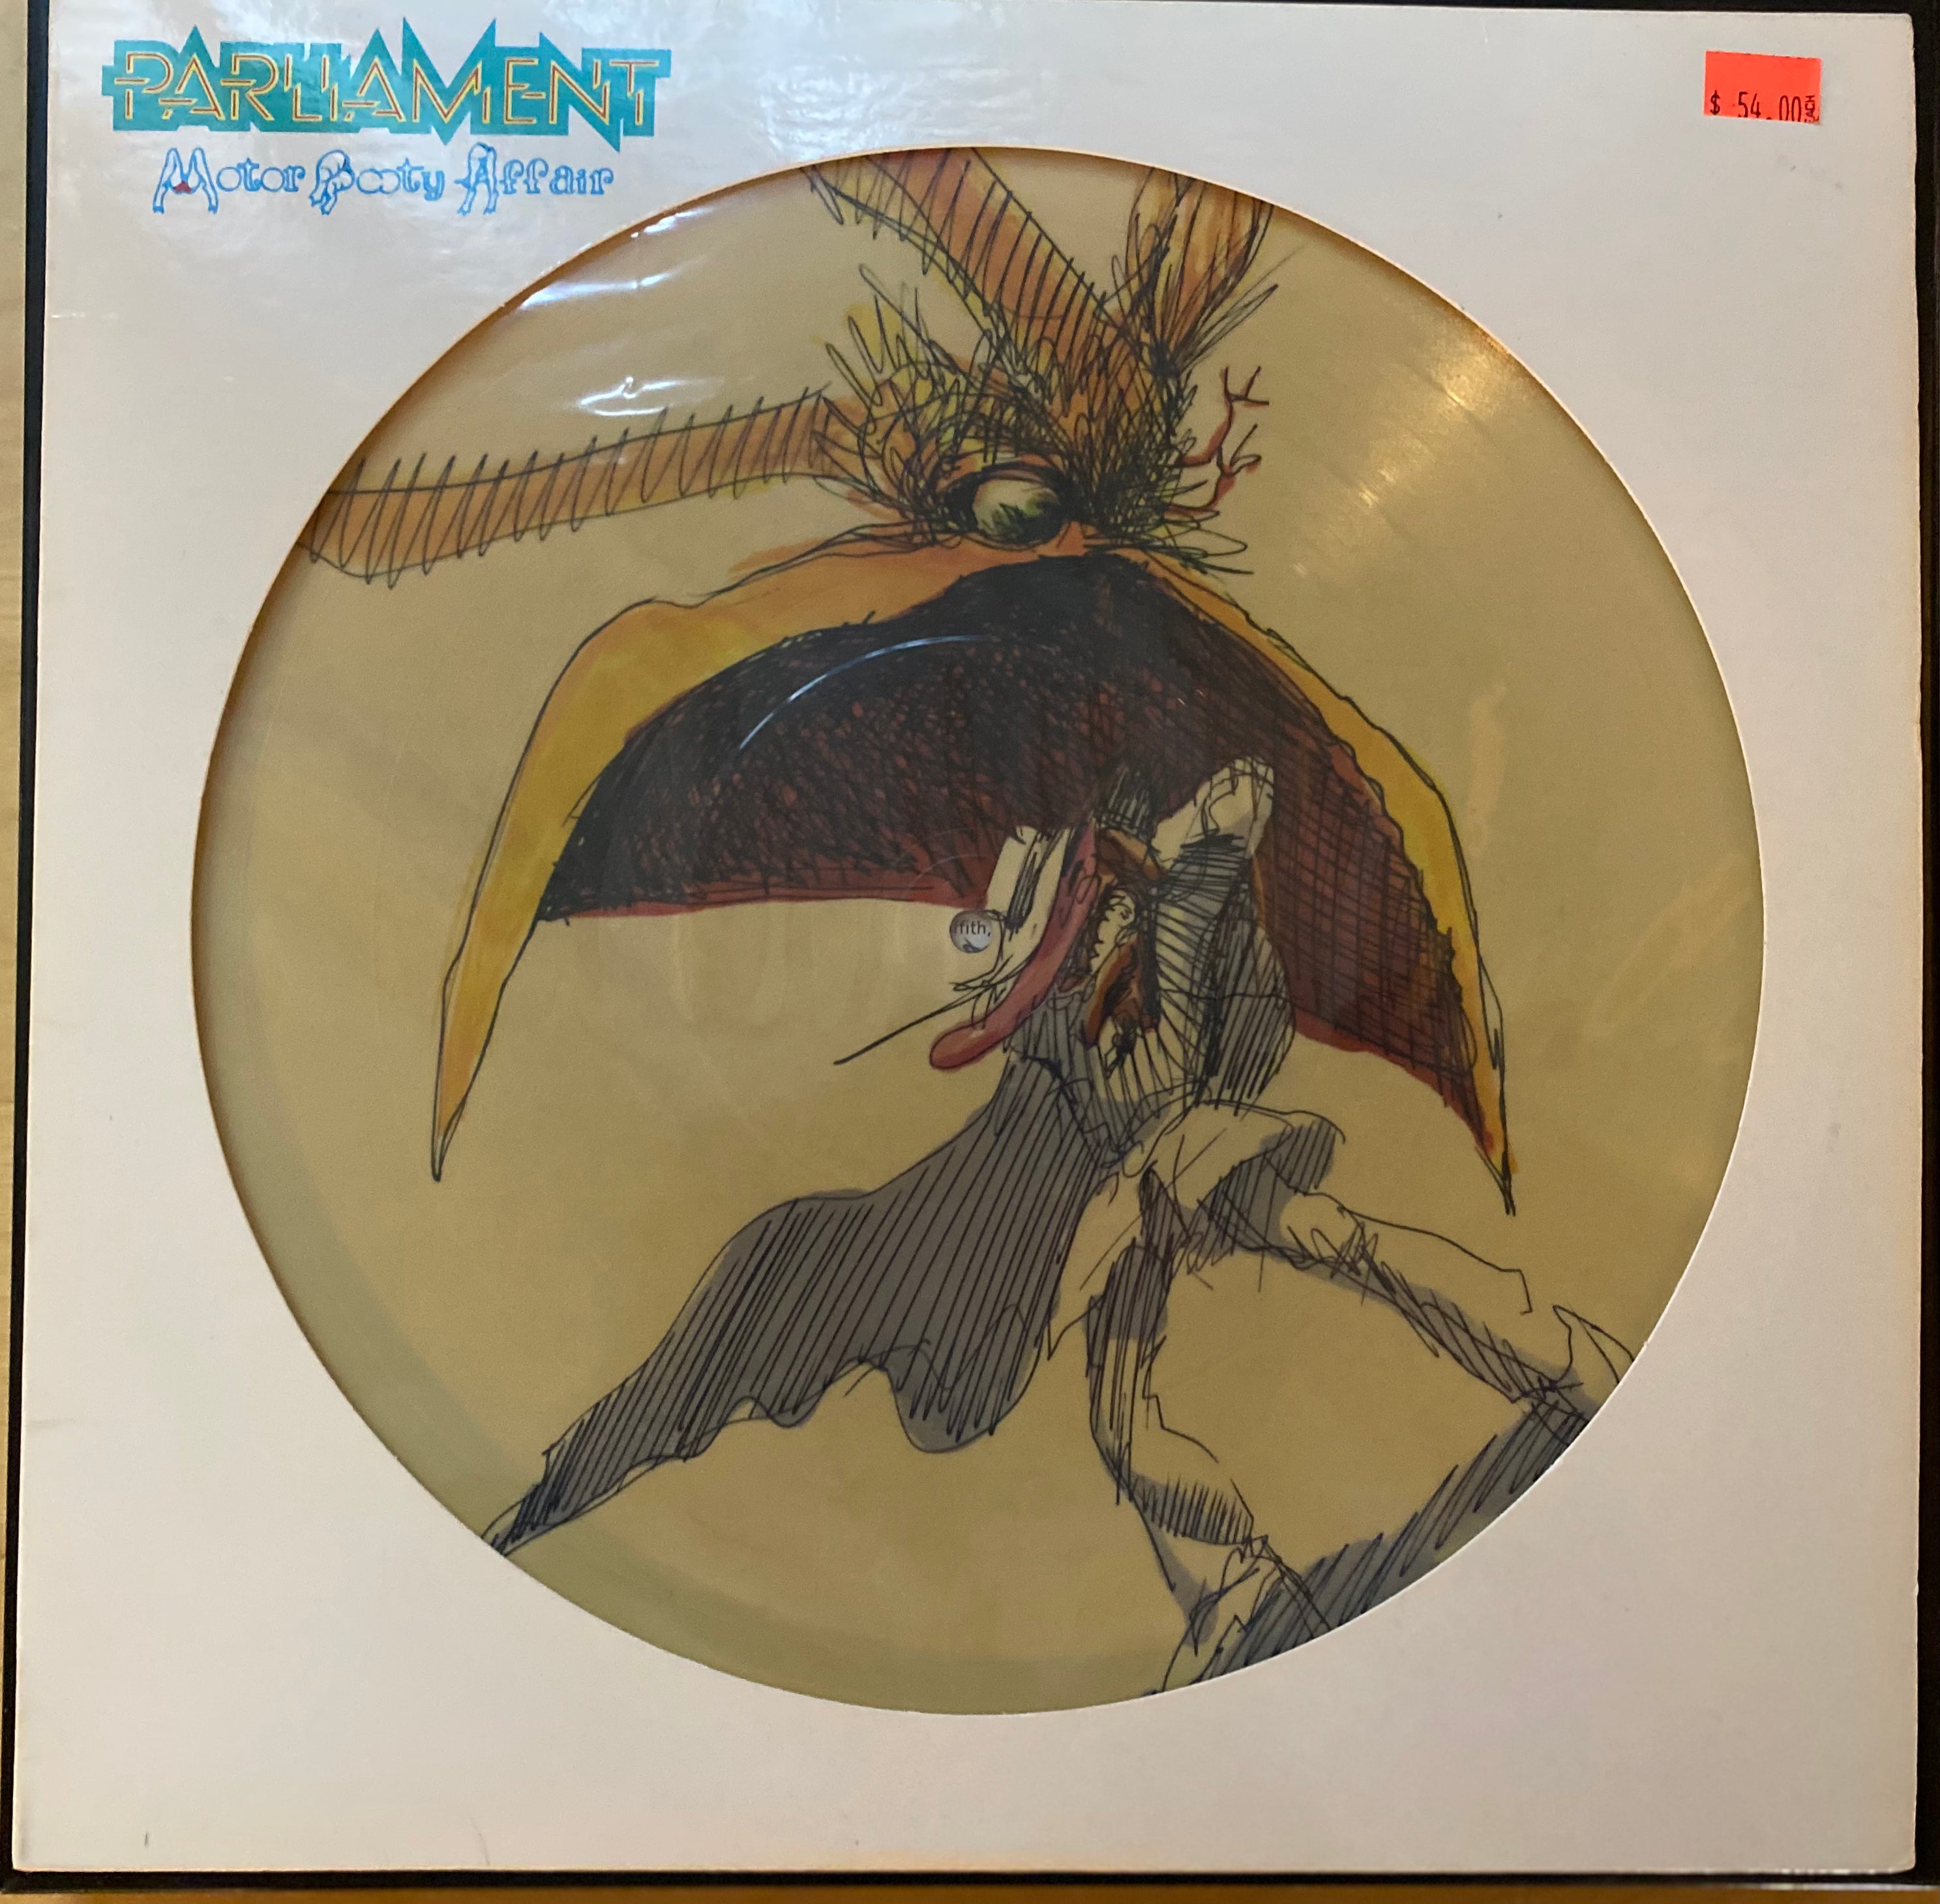 Parliament “Motor booty Affair” Picture disc 1976 – Turntable Treasures